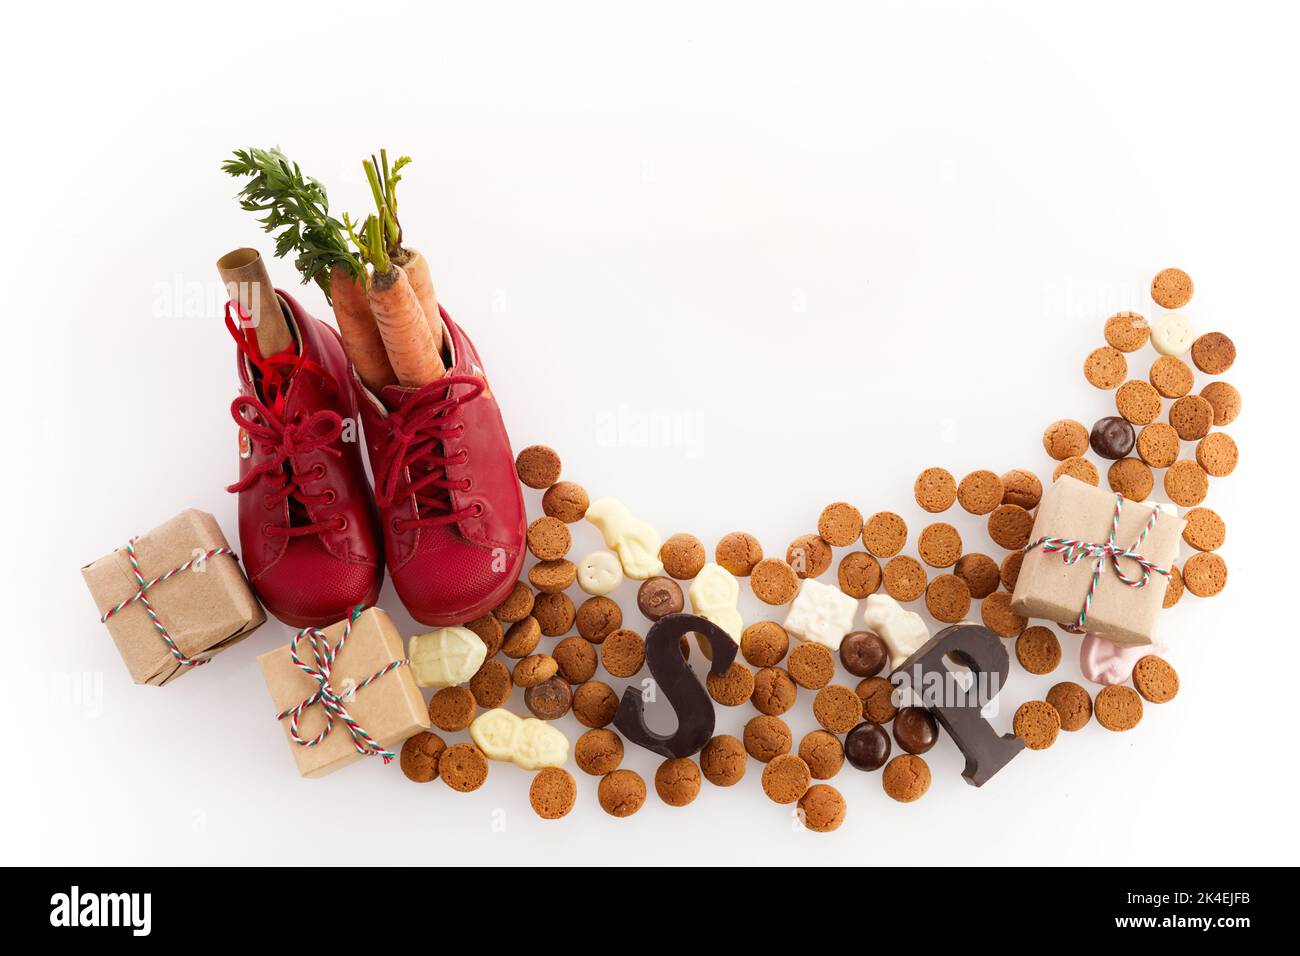 Saint Nicholas - Sinterklaas day with shoe, carrot and traditional sweets on white background Stock Photo